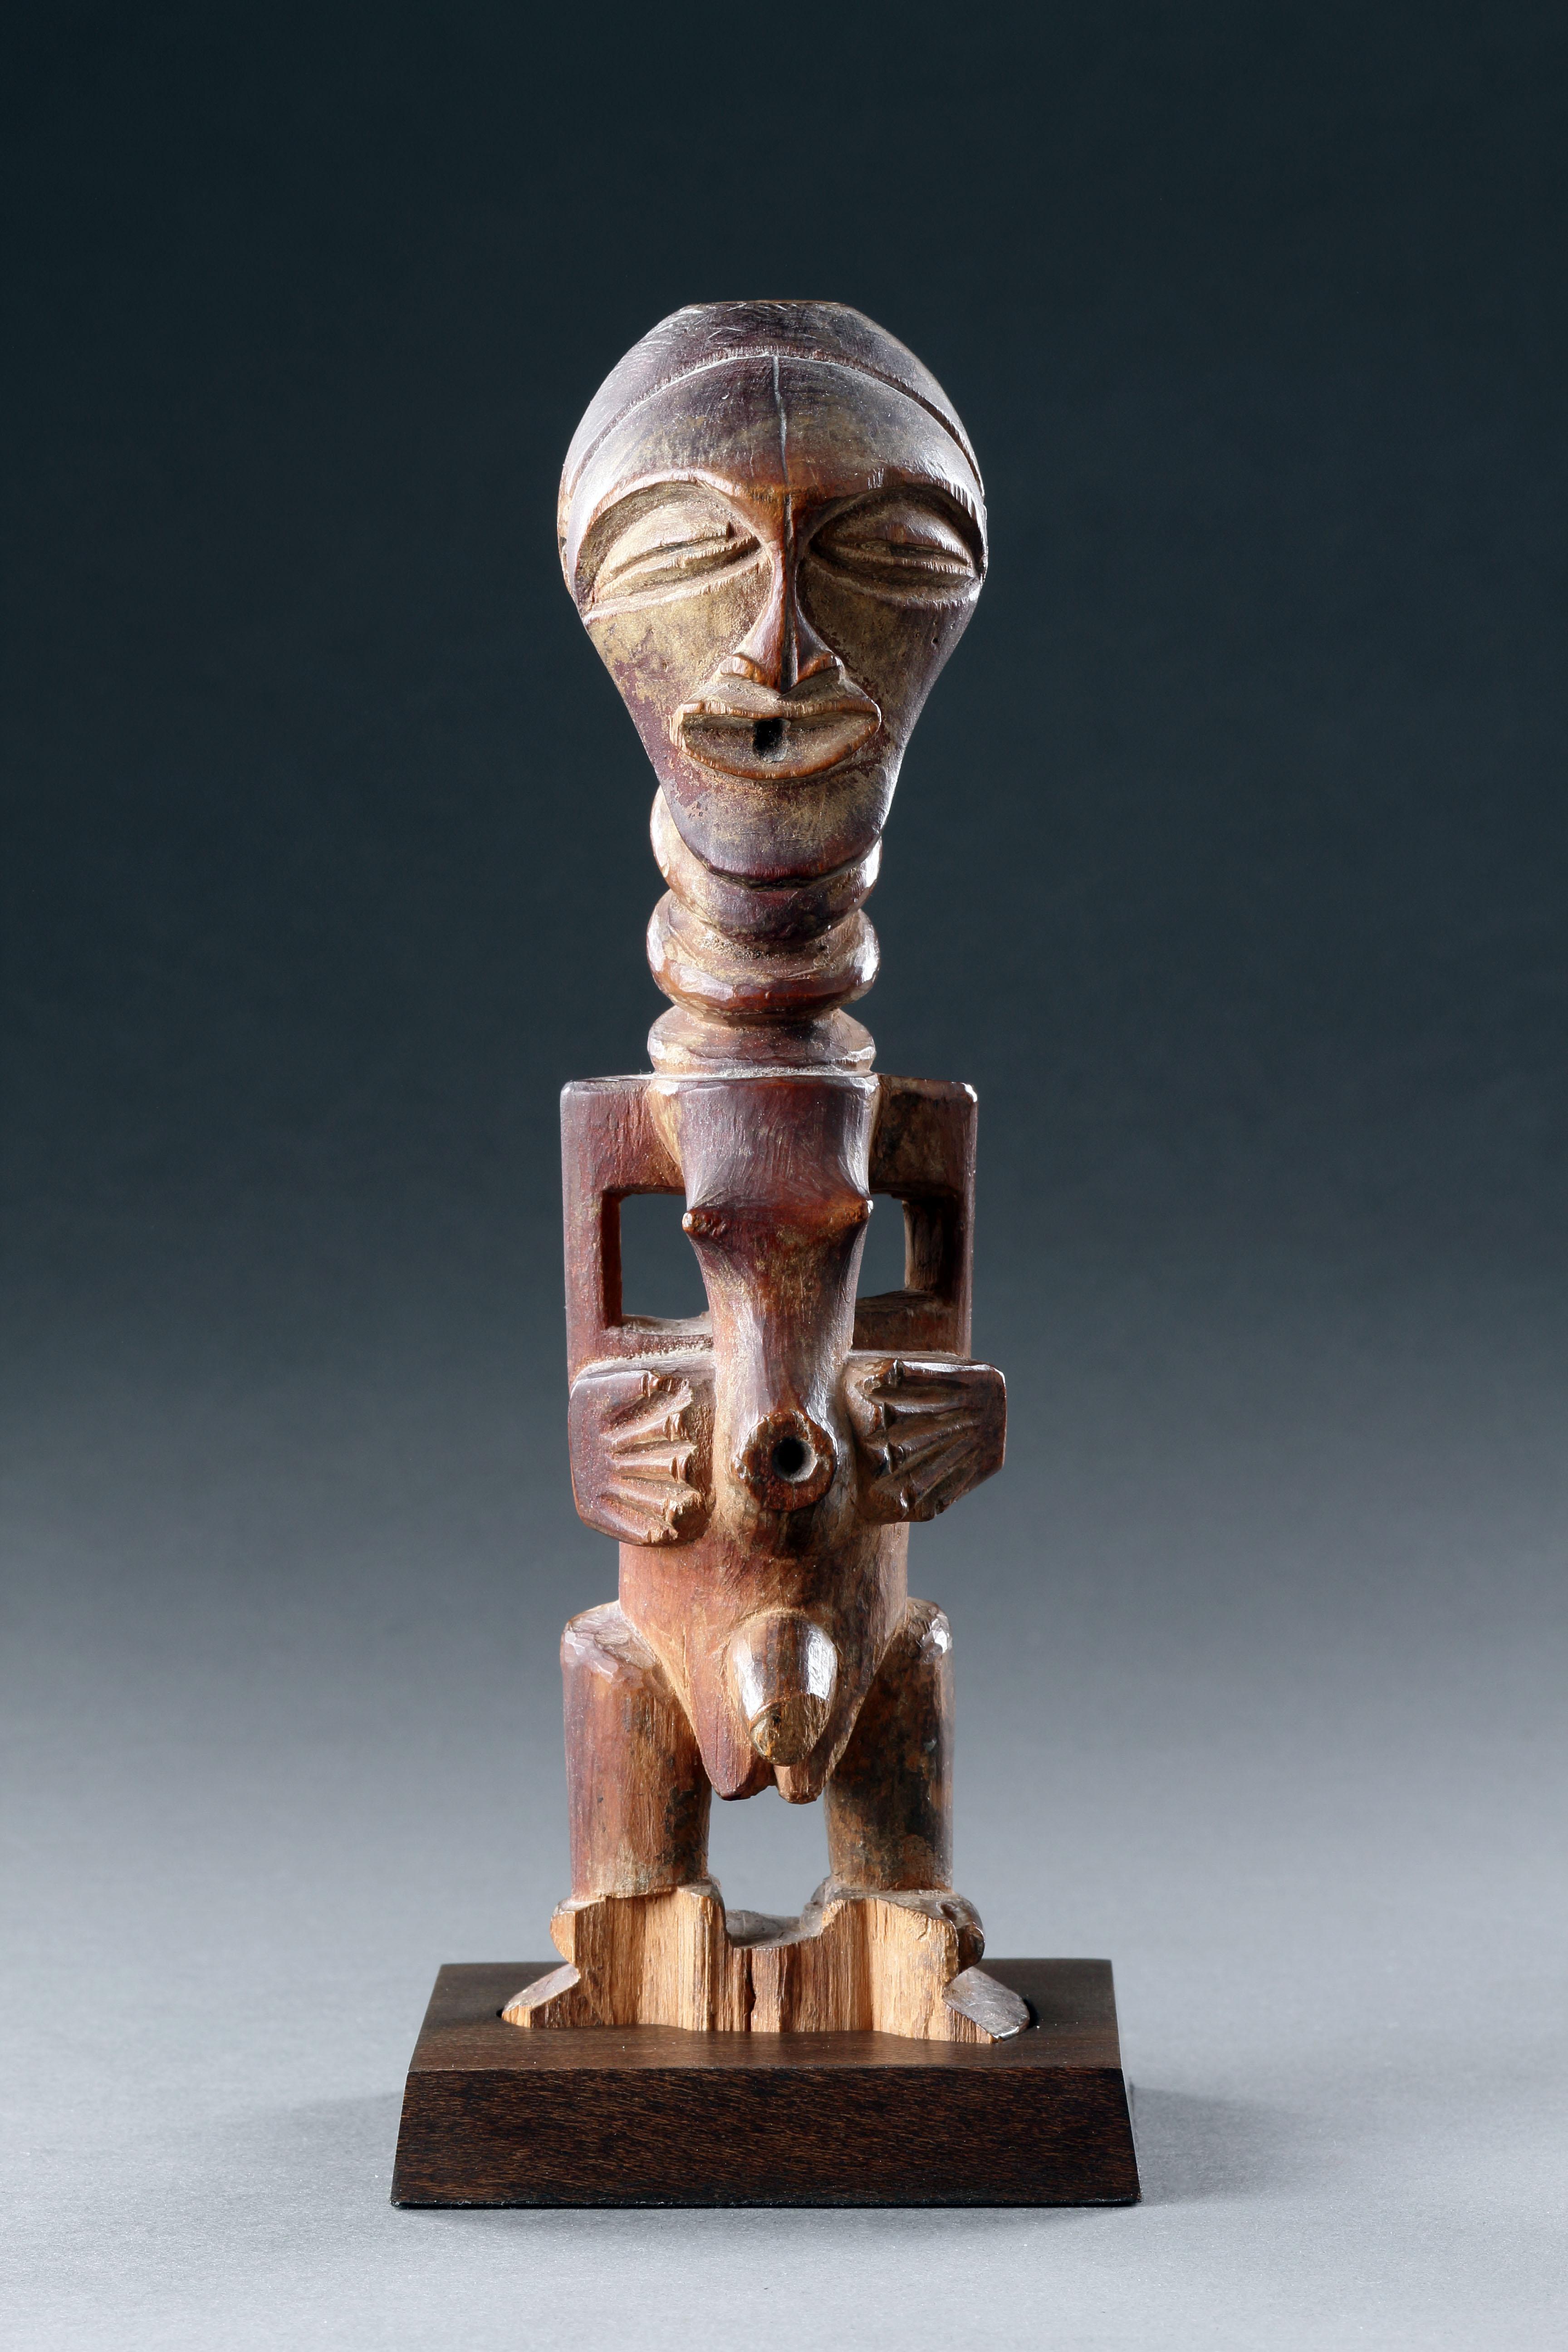 A Songye Male ‘Power’ Figure 
Open aperture to the head and stomach
Fine overall patina, loss to feet
Democratic Republic of Congo 

19th Century 

Size: 23cm high - 9 ins high

The Michel Gaud collection 
Sothebys Important African Art: ‘The Michel